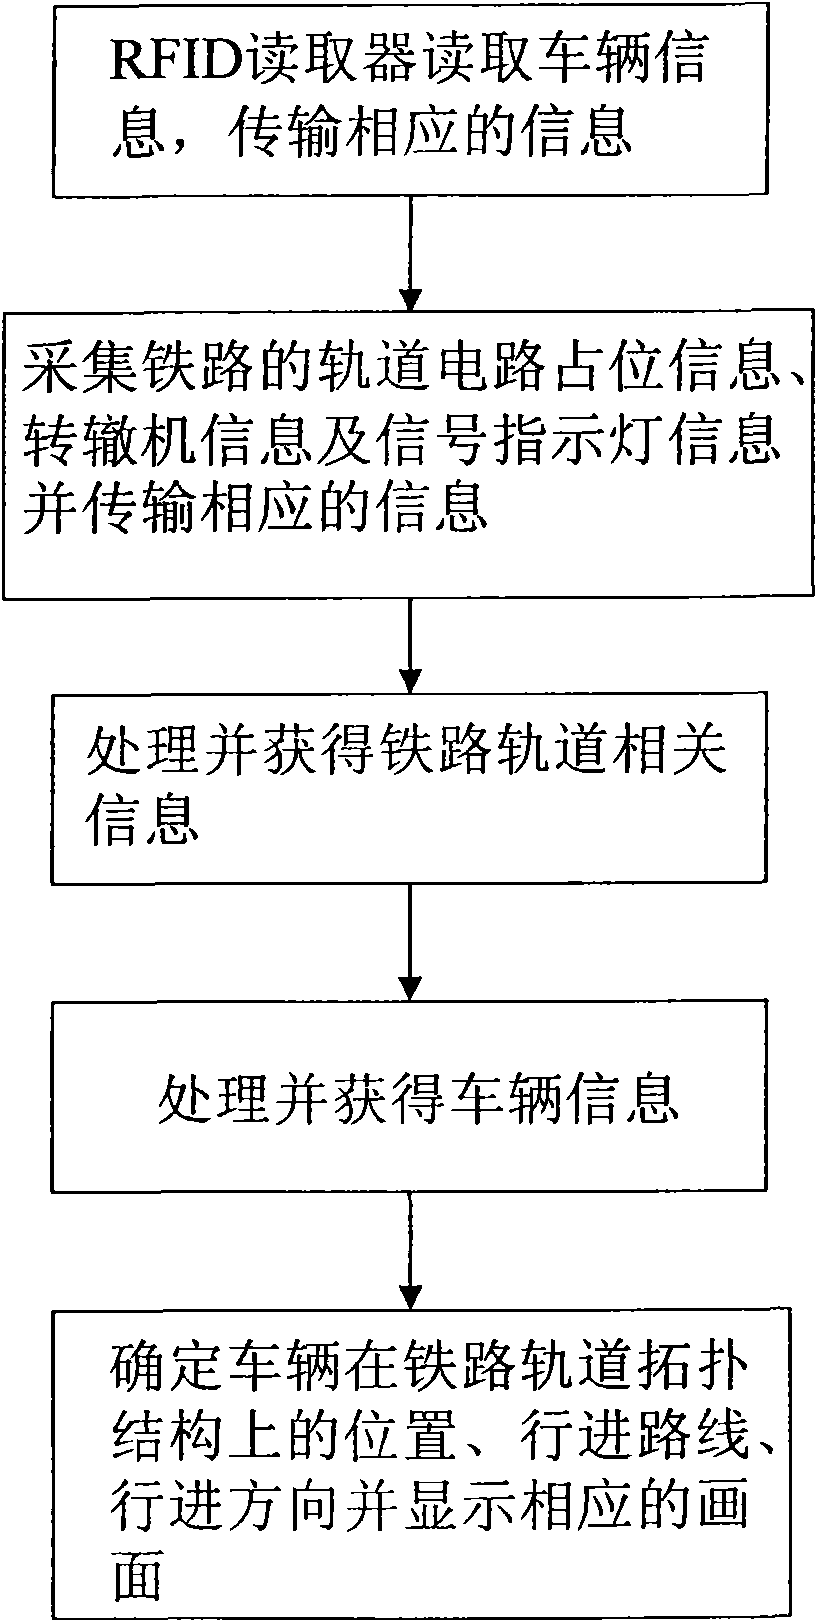 Dynamic monitoring method for position of molten iron tranportation vehicle and monitoring system thereof